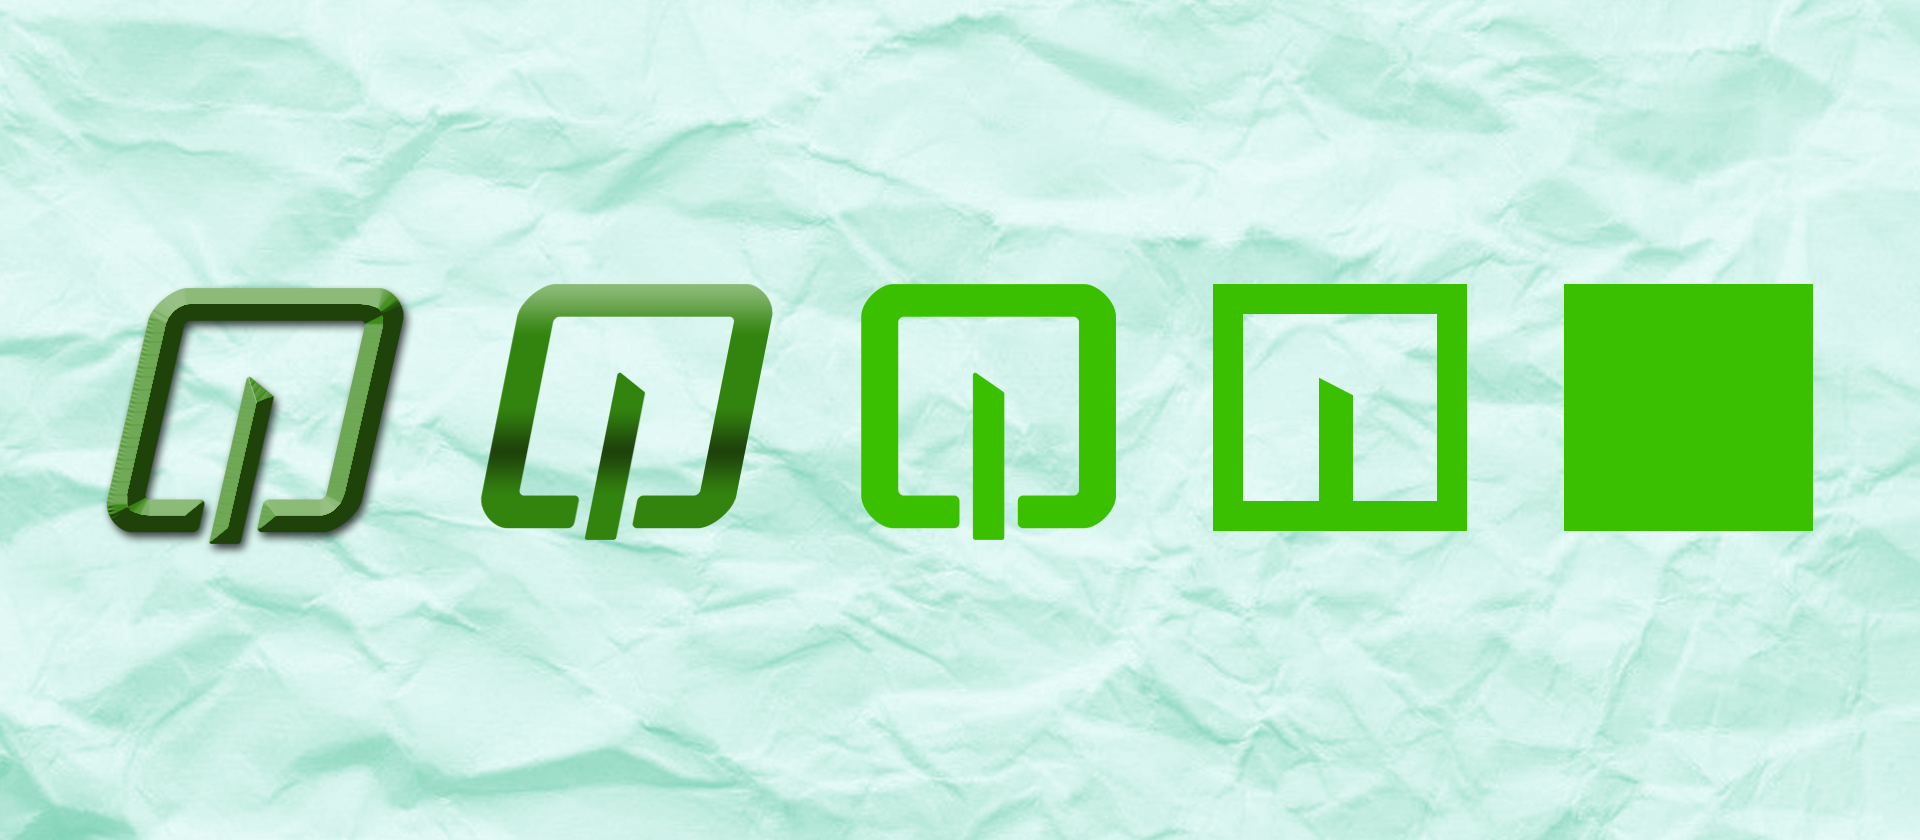 Logo transforming into a green square on top of a cyan paper background